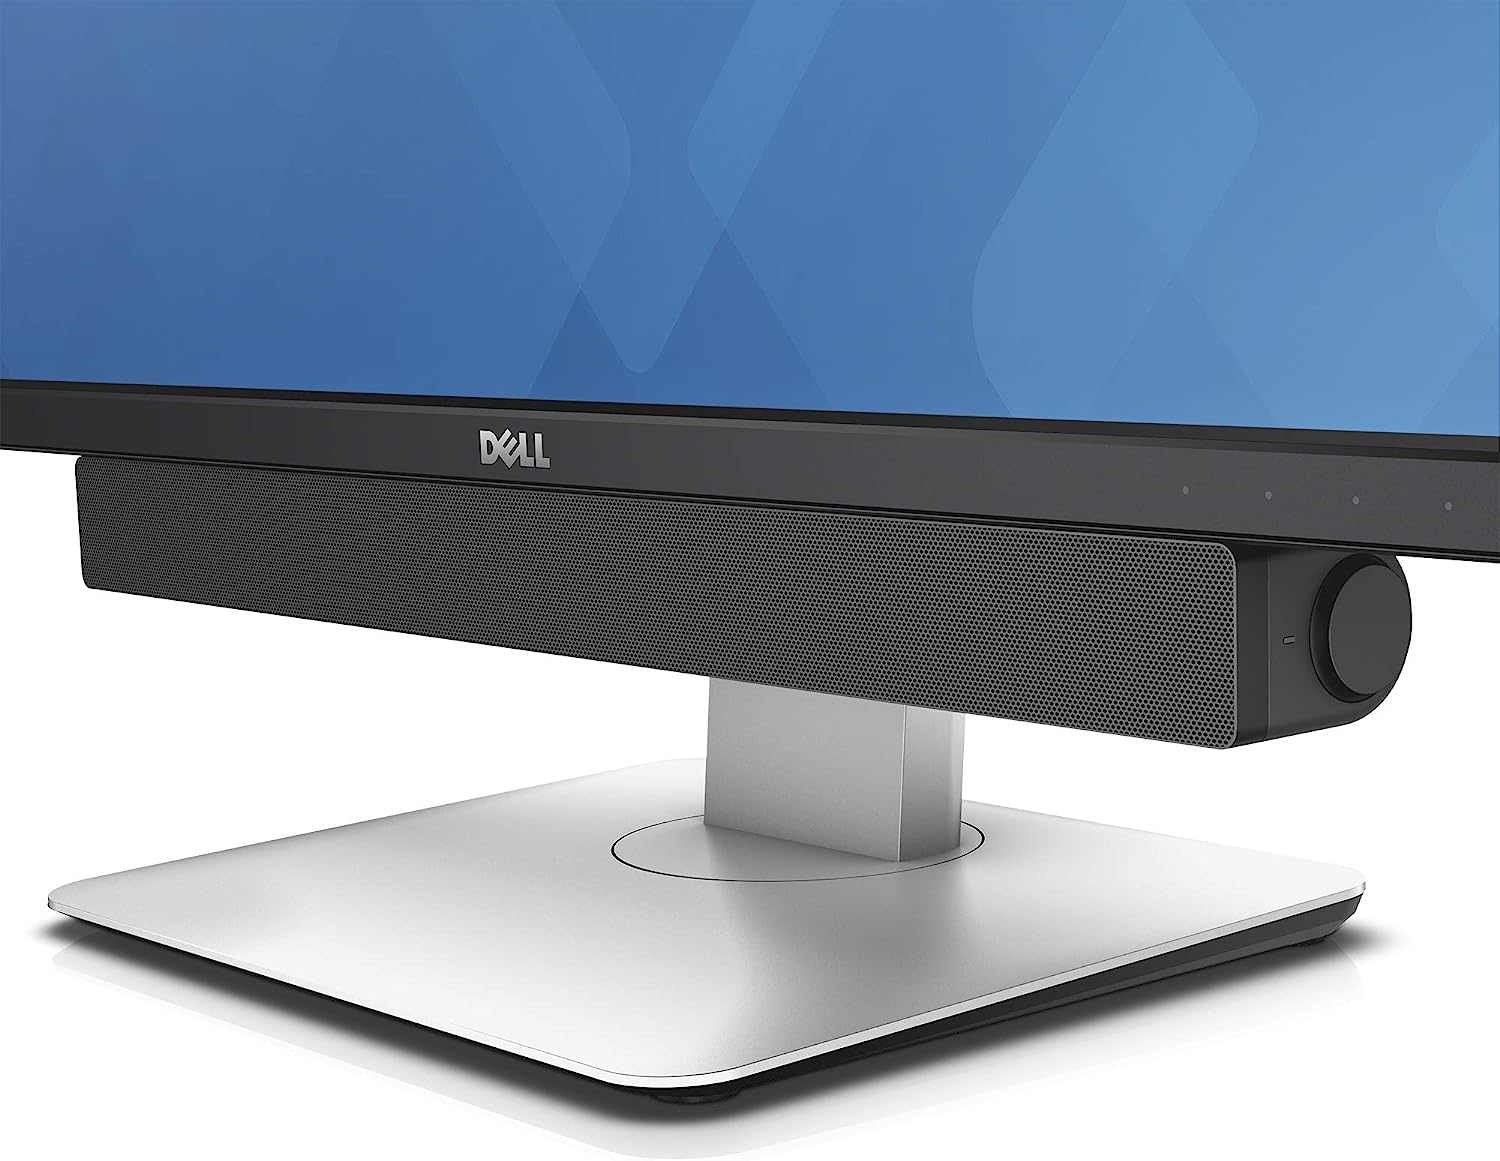 How To Remove Sound Bar From Dell Monitor